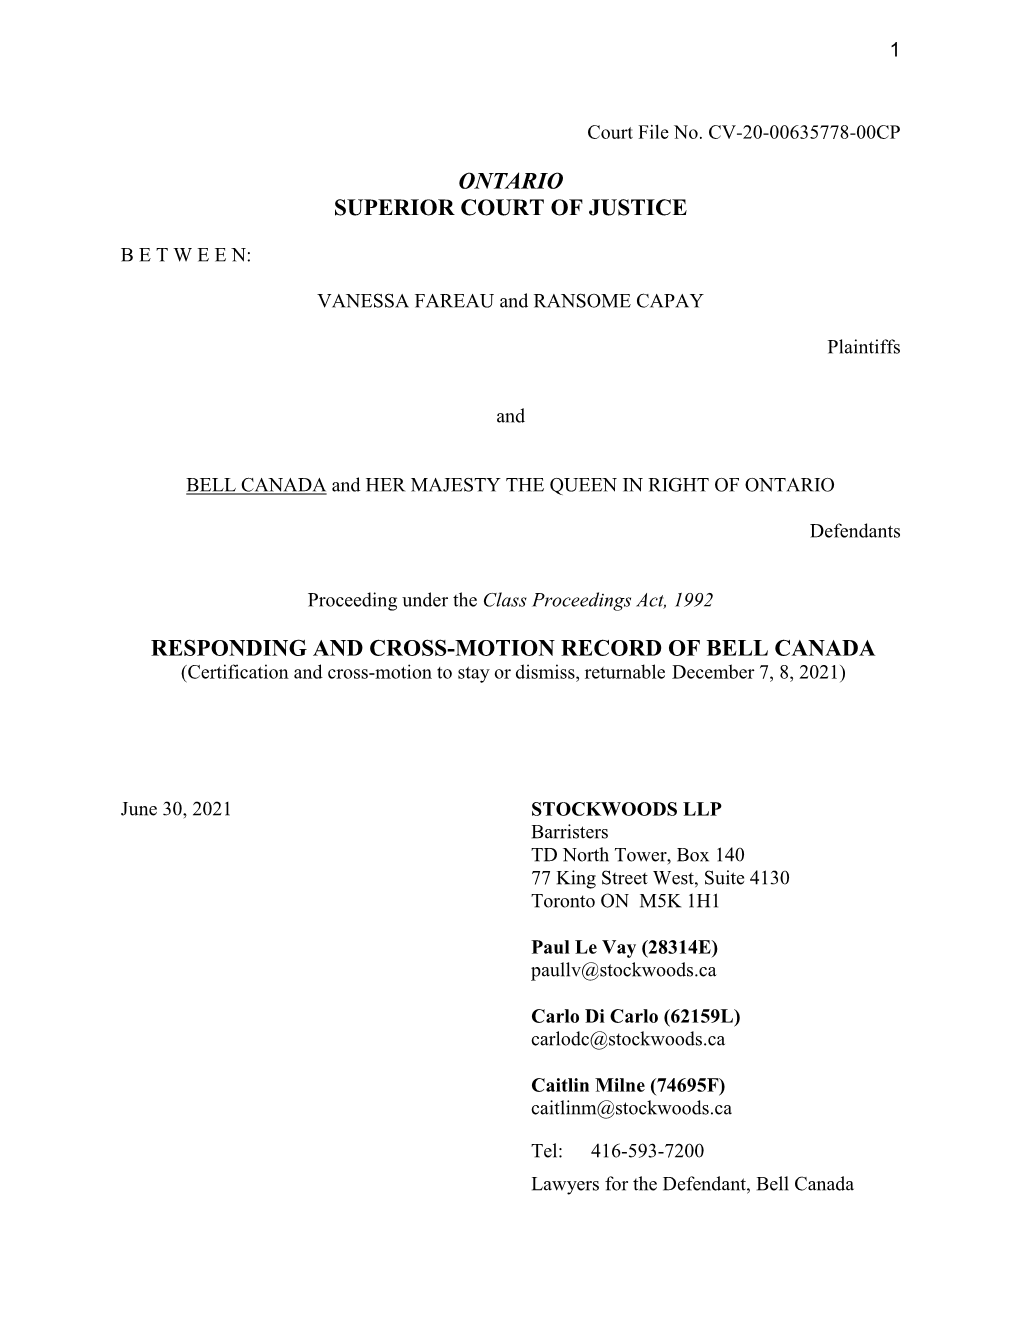 RESPONDING and CROSS-MOTION RECORD of BELL CANADA (Certification and Cross-Motion to Stay Or Dismiss, Returnable December 7, 8, 2021)